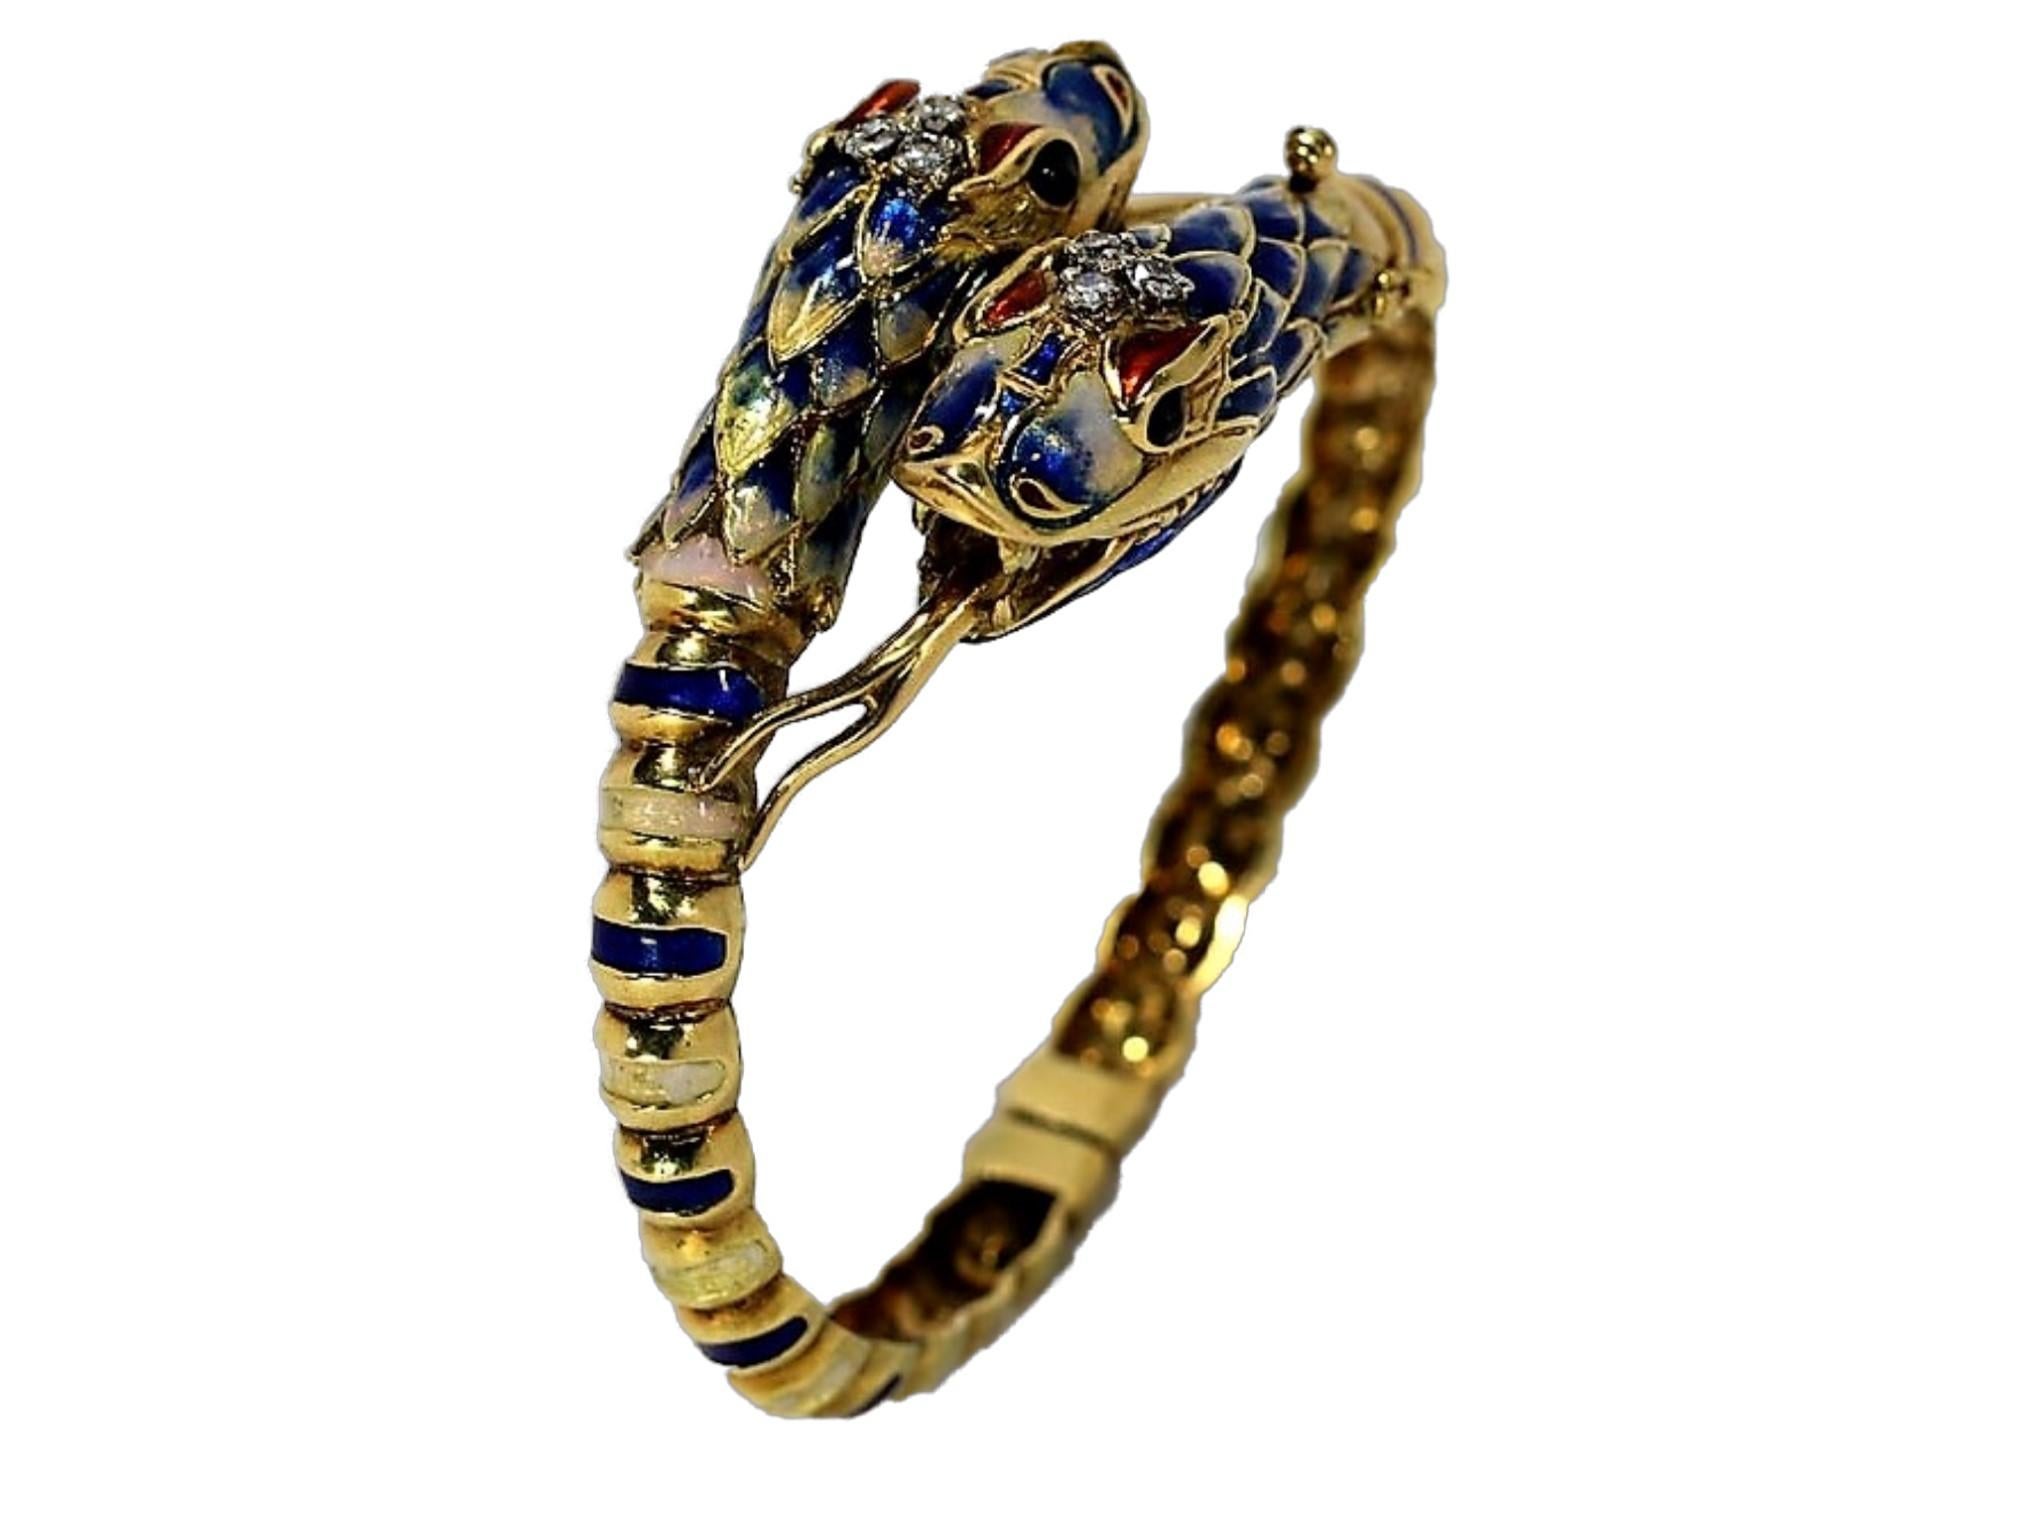 Crafted in 18k yellow gold and multi-color enamel, this exotic
and striking bangle features two snake heads, each measuring
1 1/2 inch long by 1/2 inch wide,  topped with three diamonds.
The six diamonds have a  .25CT total approximate weight.
The